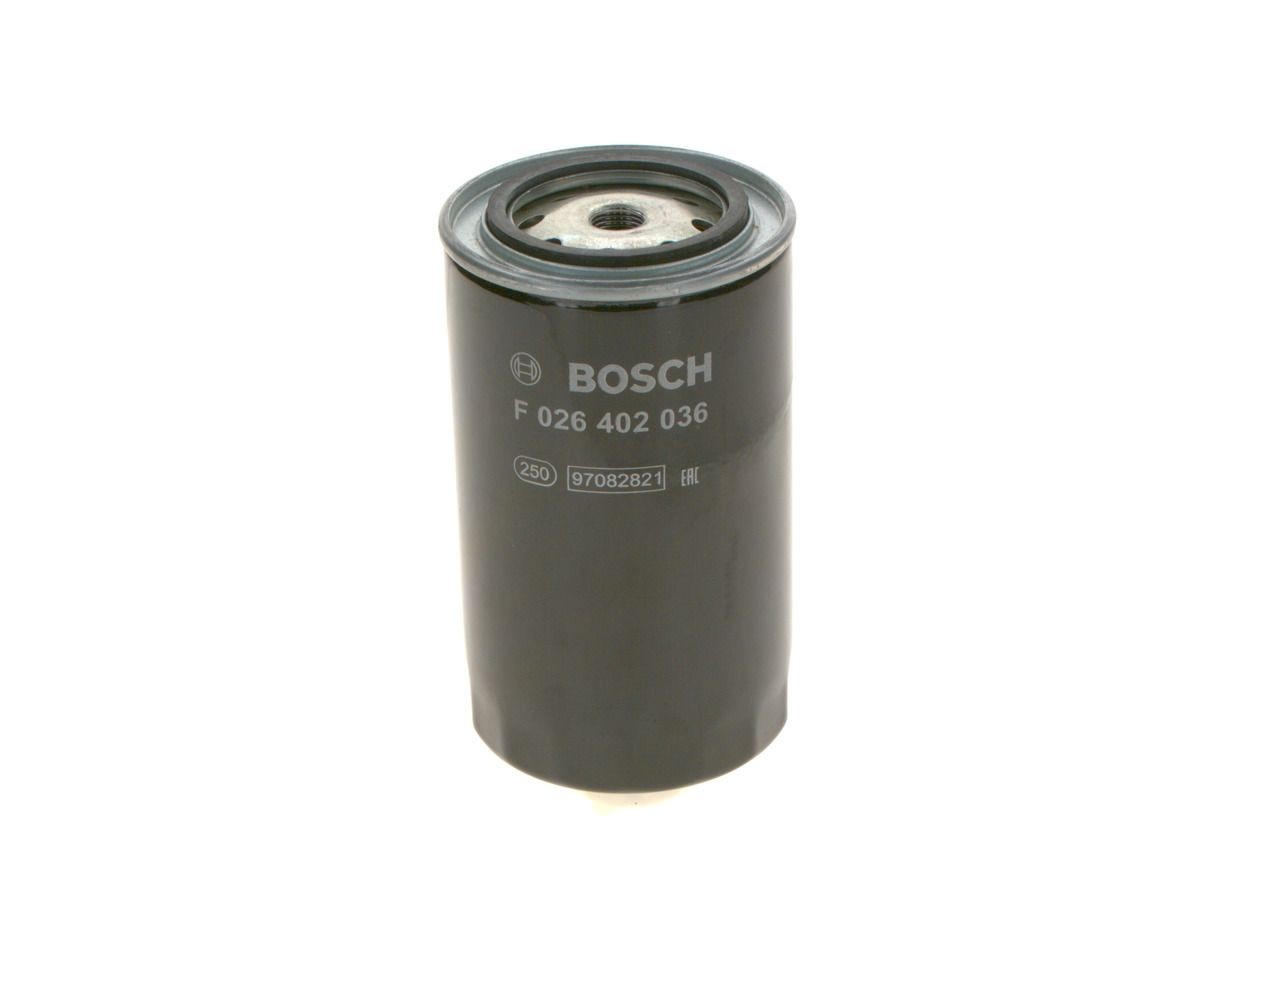 BOSCH Fuel filter F 026 402 036 for IVECO Daily